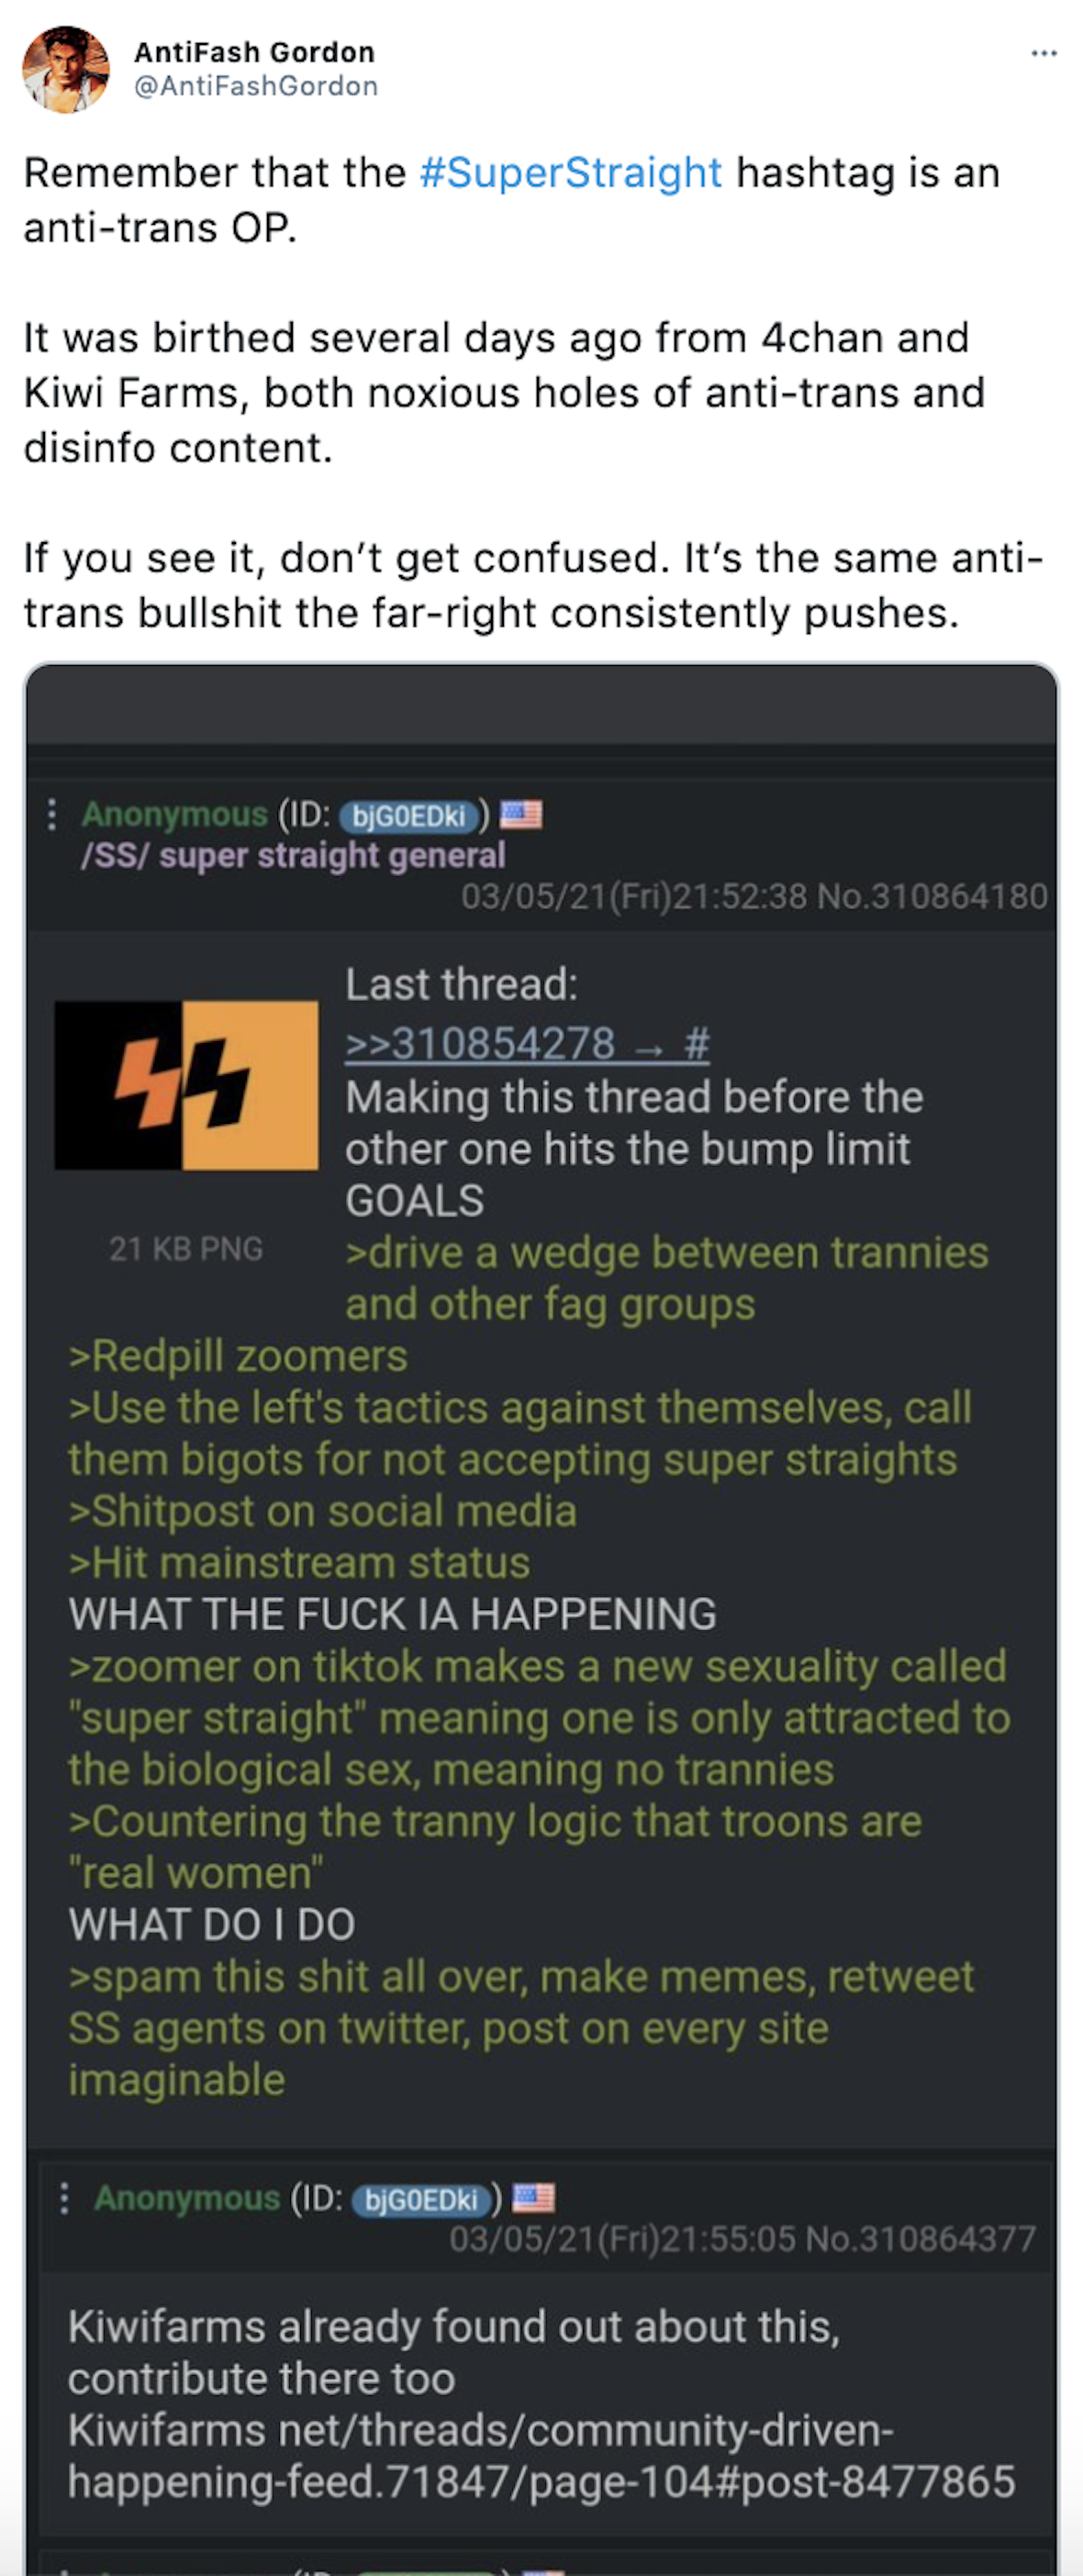 'Remember that the #SuperStraight hashtag is an anti-trans OP. It was birthed several days ago from 4chan and Kiwi Farms, both noxious holes of anti-trans and disinfo content. If you see it, don’t get confused. It’s the same anti-trans bullshit the far-right consistently pushes.' screenshot of a 4Chan post saying 'Making this thread before the other hits the bump limit GOAL > drive a wedge between trannies and other fag groups >redpill Zoomers >Use the left's tactics against themselves, call them bigots for not accepting super straights >Shitpost on social media >Hit mainstream status WHAT THE FUCK IS HAPPENING >Zoomer on TikTok makes a new sexuality known as super straight meaning one is only attracted to the biological sex, meaning no trannies >countering the tranny logic that troons are 'real women' WHAT DO I DO >spam this shit all over, make memes, retweet SS agents on Twitter, post on every site imaginable